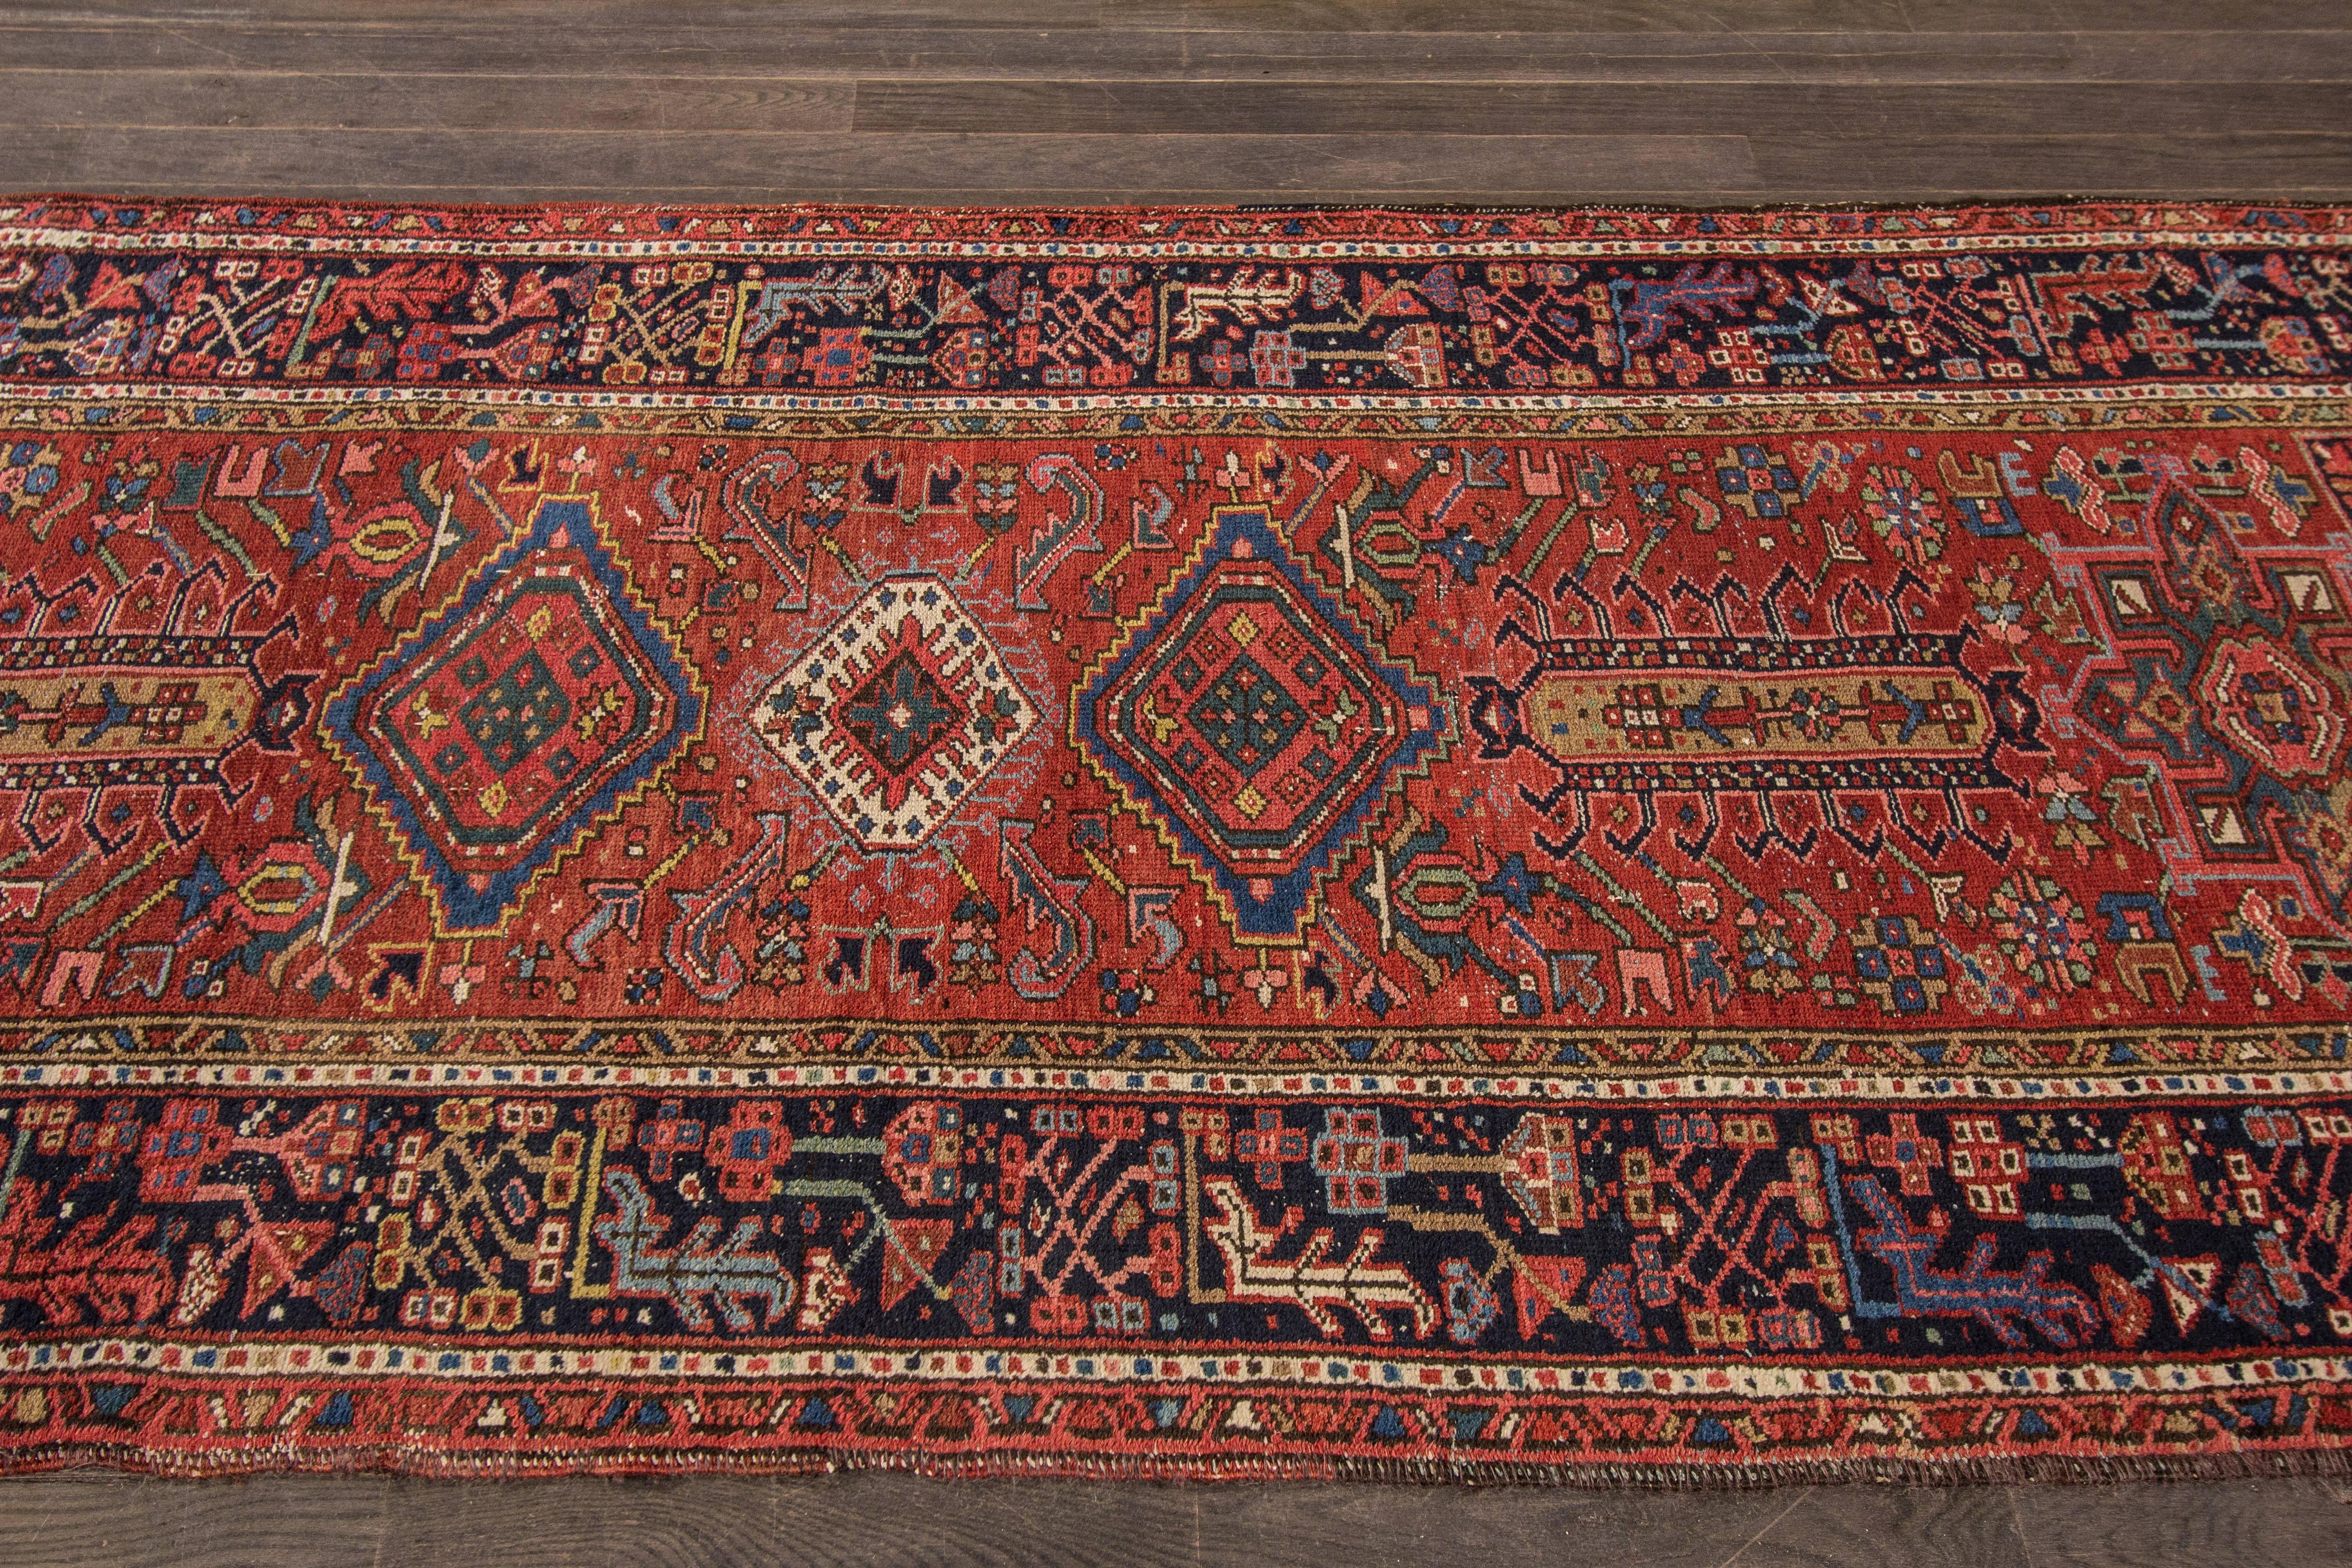 Measures: 3'.7 x 13'.3
A hand-knotted antique Persian Heriz rug with a geometric floral design on a red field. Accents of black, blue and ivory throughout the piece.